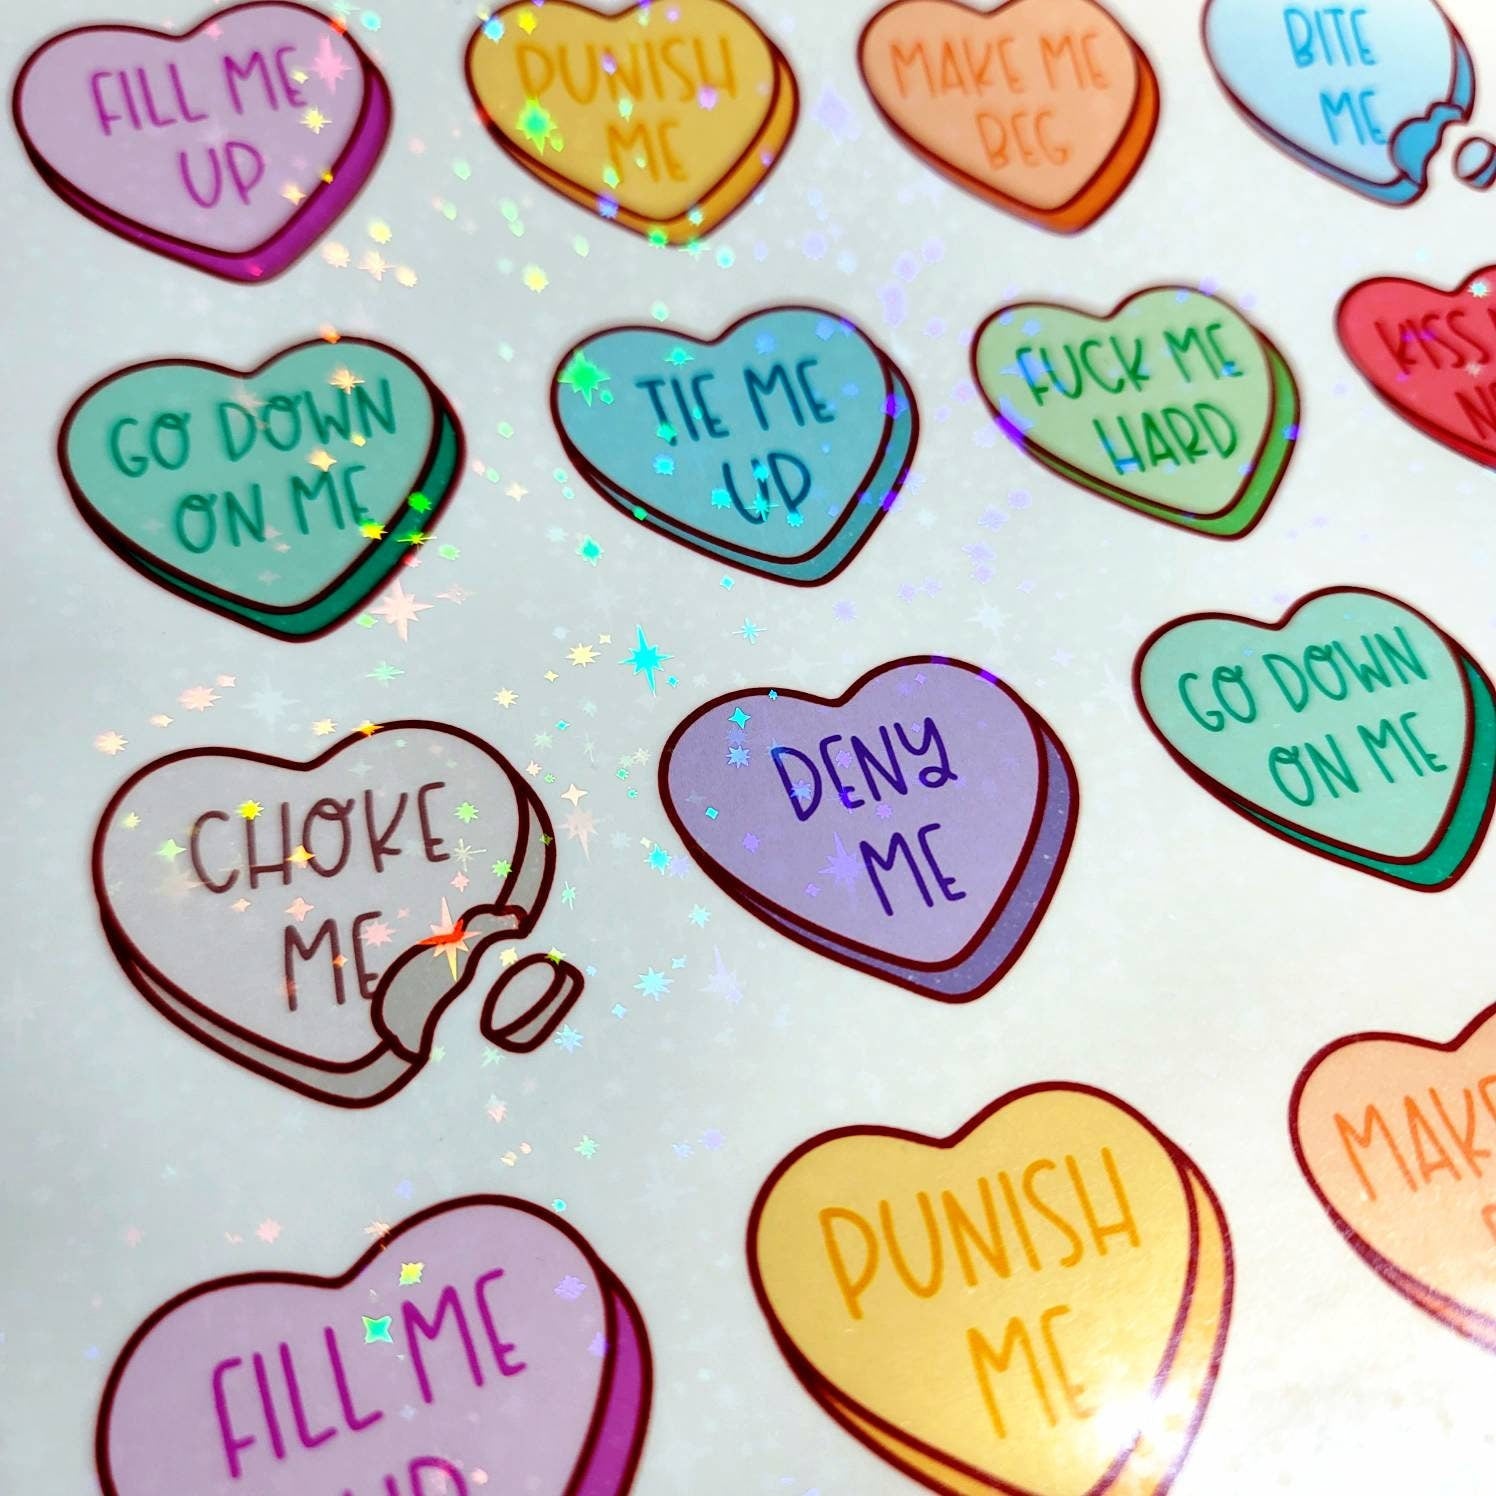 candy heart stickers set, naughty sticker pack, tie me up smut sticker bundle, Valentines day gifts for girlfriend, bdsm stickers for laptop